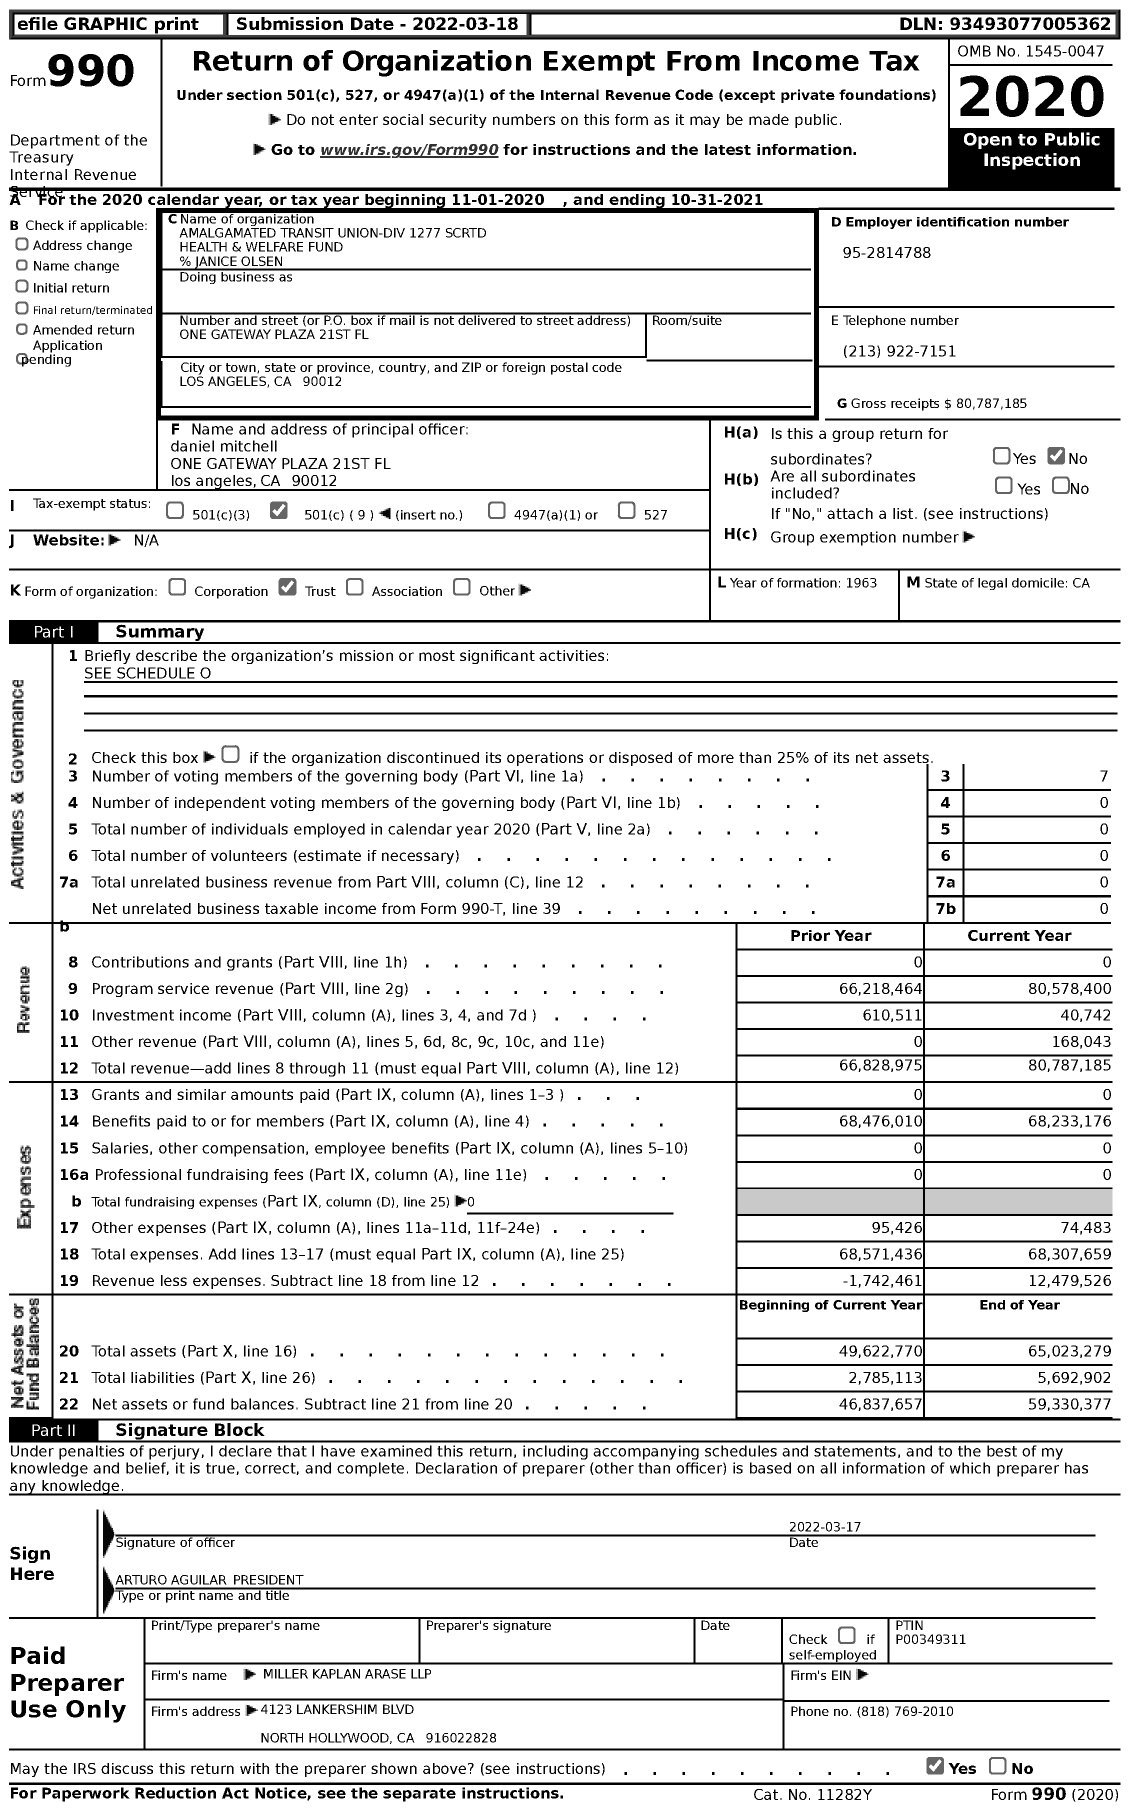 Image of first page of 2020 Form 990 for AMALGAMATED TRANSIT UNION-DIV 1277 SCRTD HEALTH and WELFARE FUND